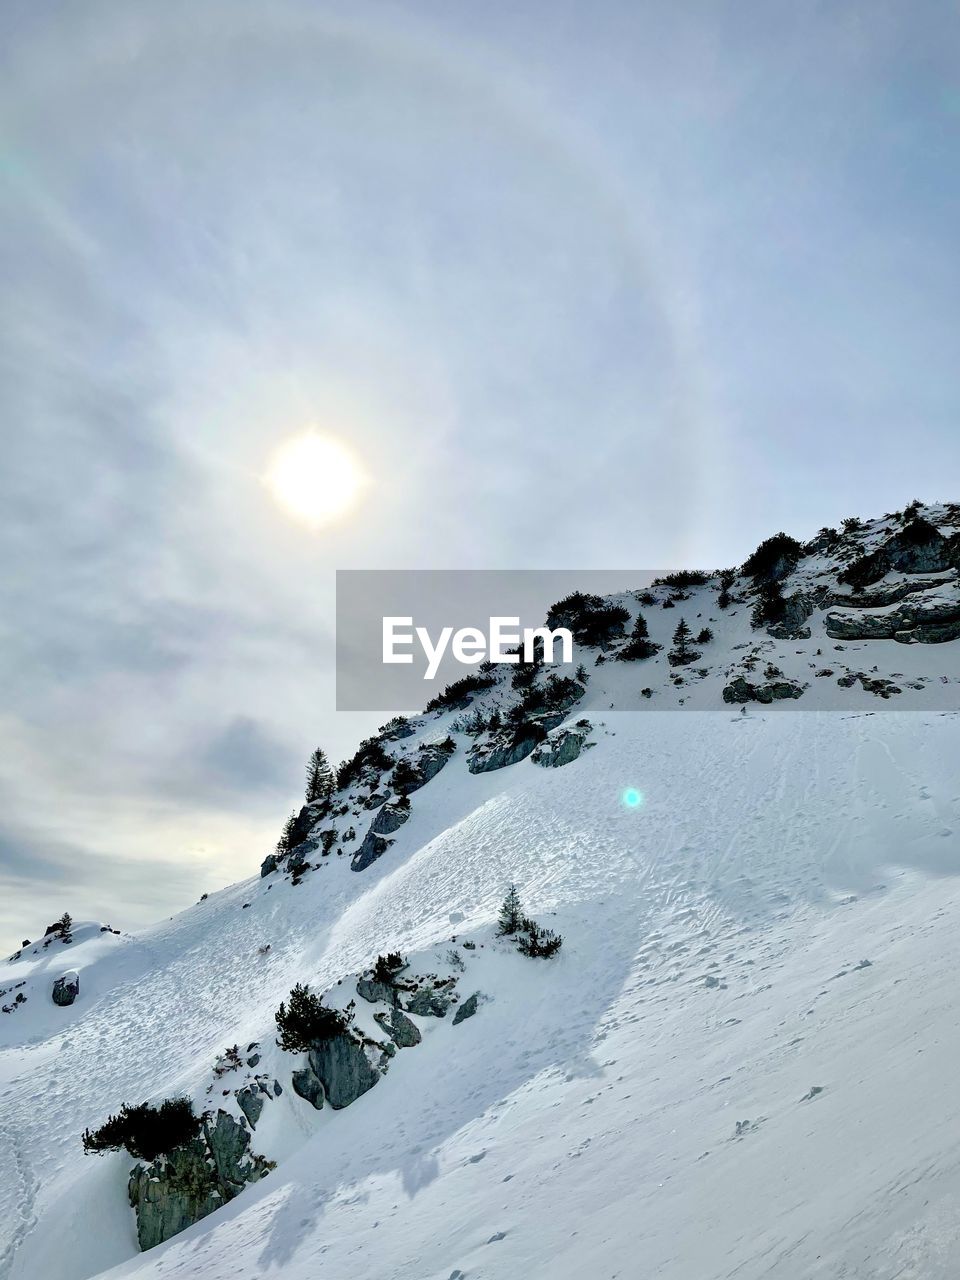 SCENIC VIEW OF SNOW COVERED MOUNTAINS AGAINST BRIGHT SUN